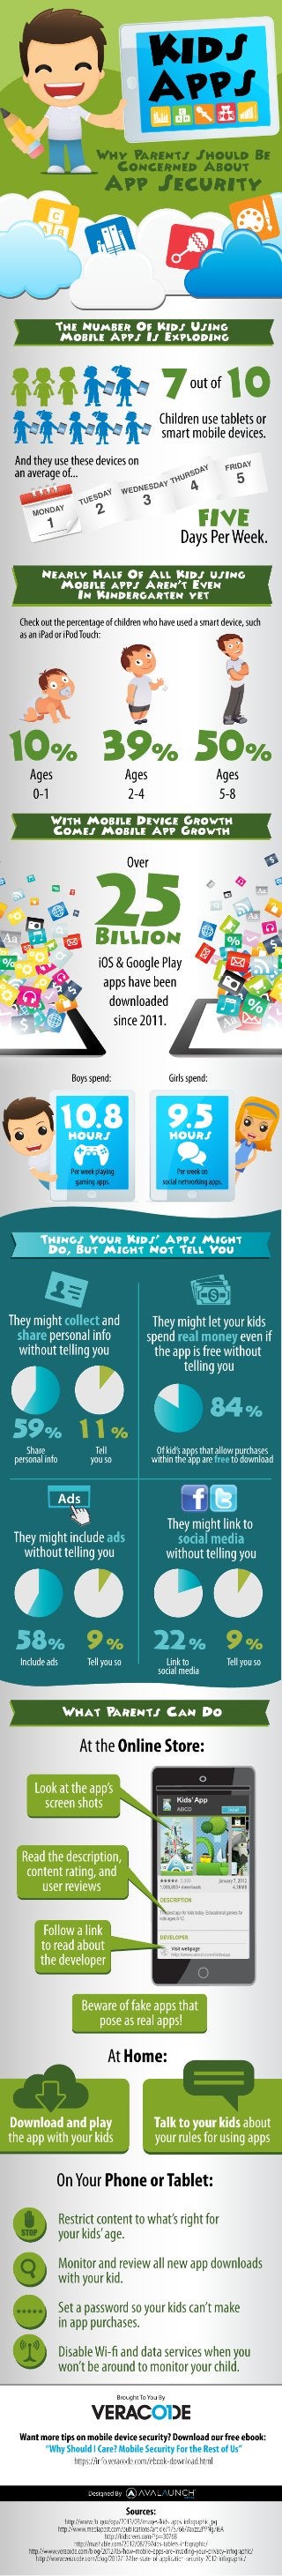 The Great Tips to protect your Children - Infographic